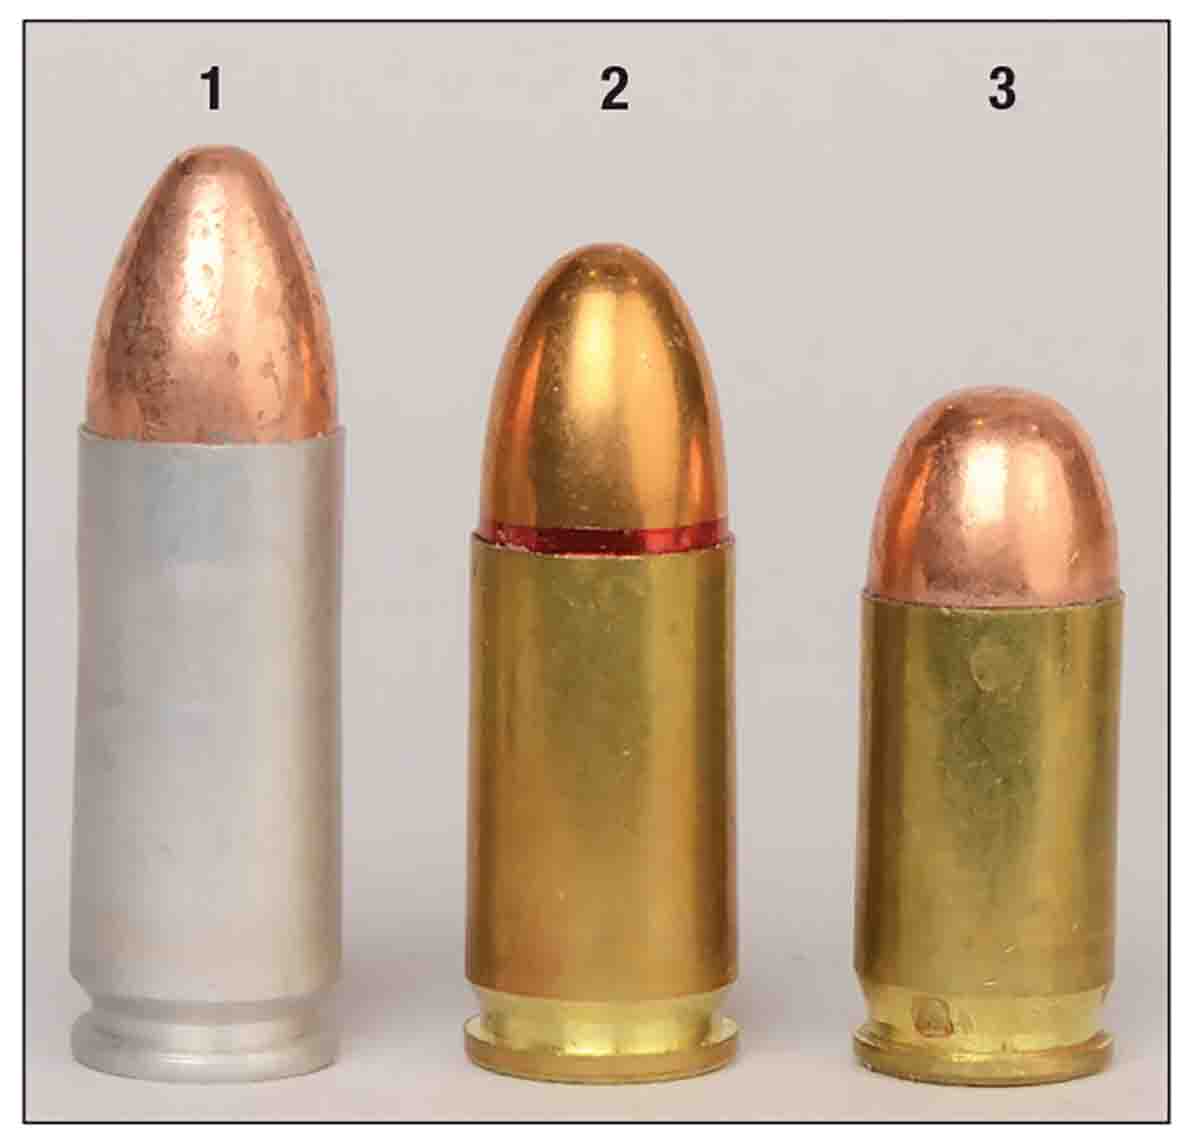 Cartridges: (1) 9mm Largo, (2) 9mm Luger and (3) 380 Auto.